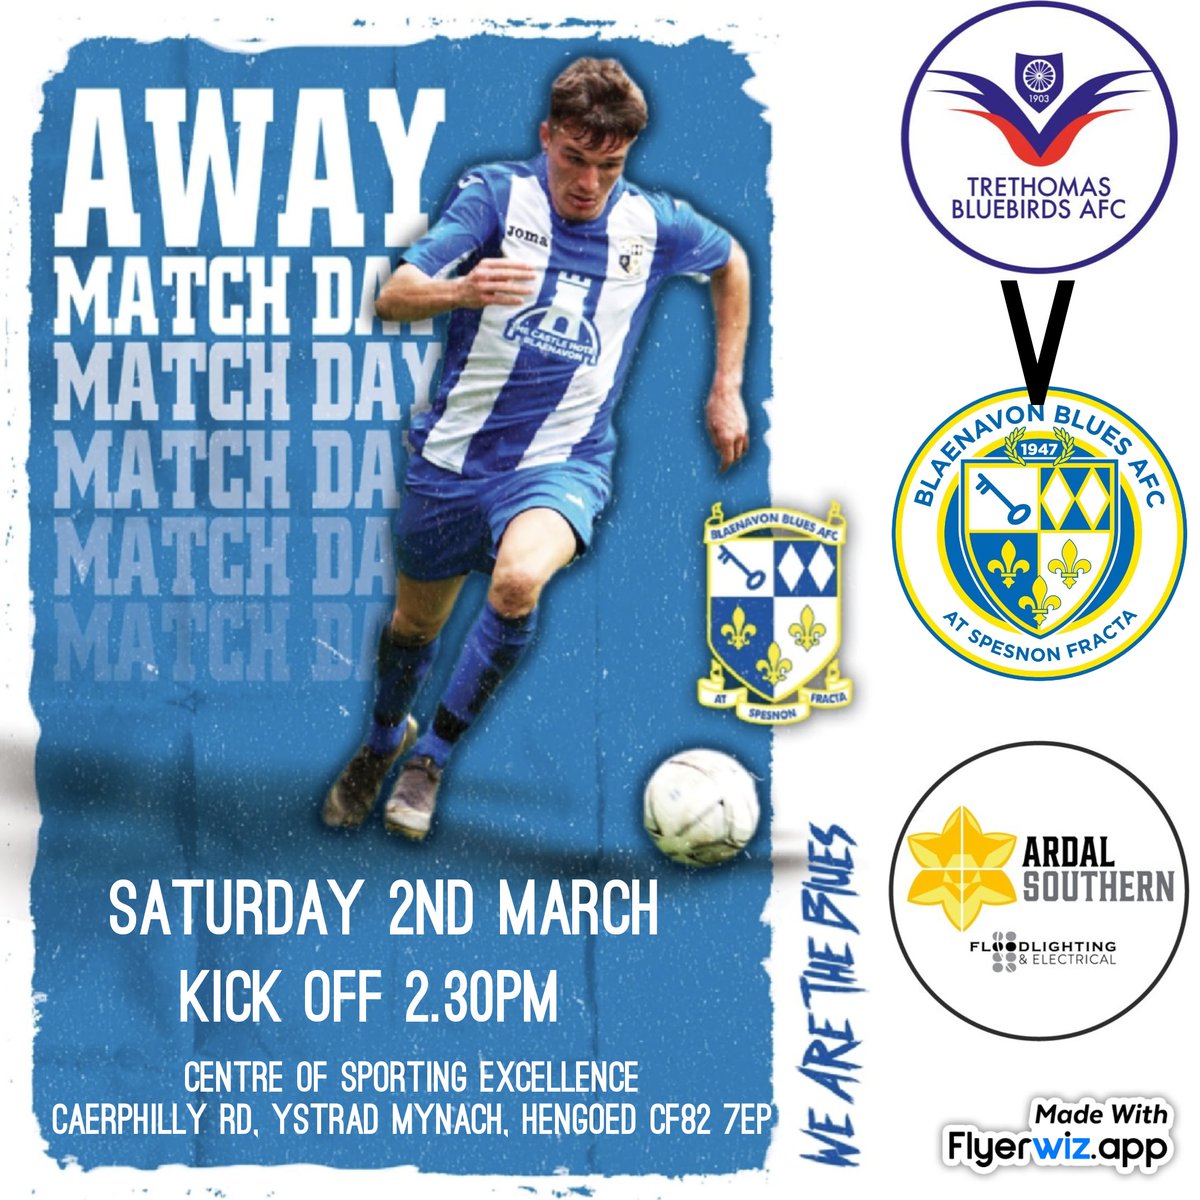 We have the unenviable task of taking on high flyers @TreBluebirdsFC this Saturday at the @CSEYstradMynach 3G in the @ArdalSouthern league. The hosts are unbeaten in their 17 league games to date, conceding only 12 goals so far. Kick off 2.30pm!